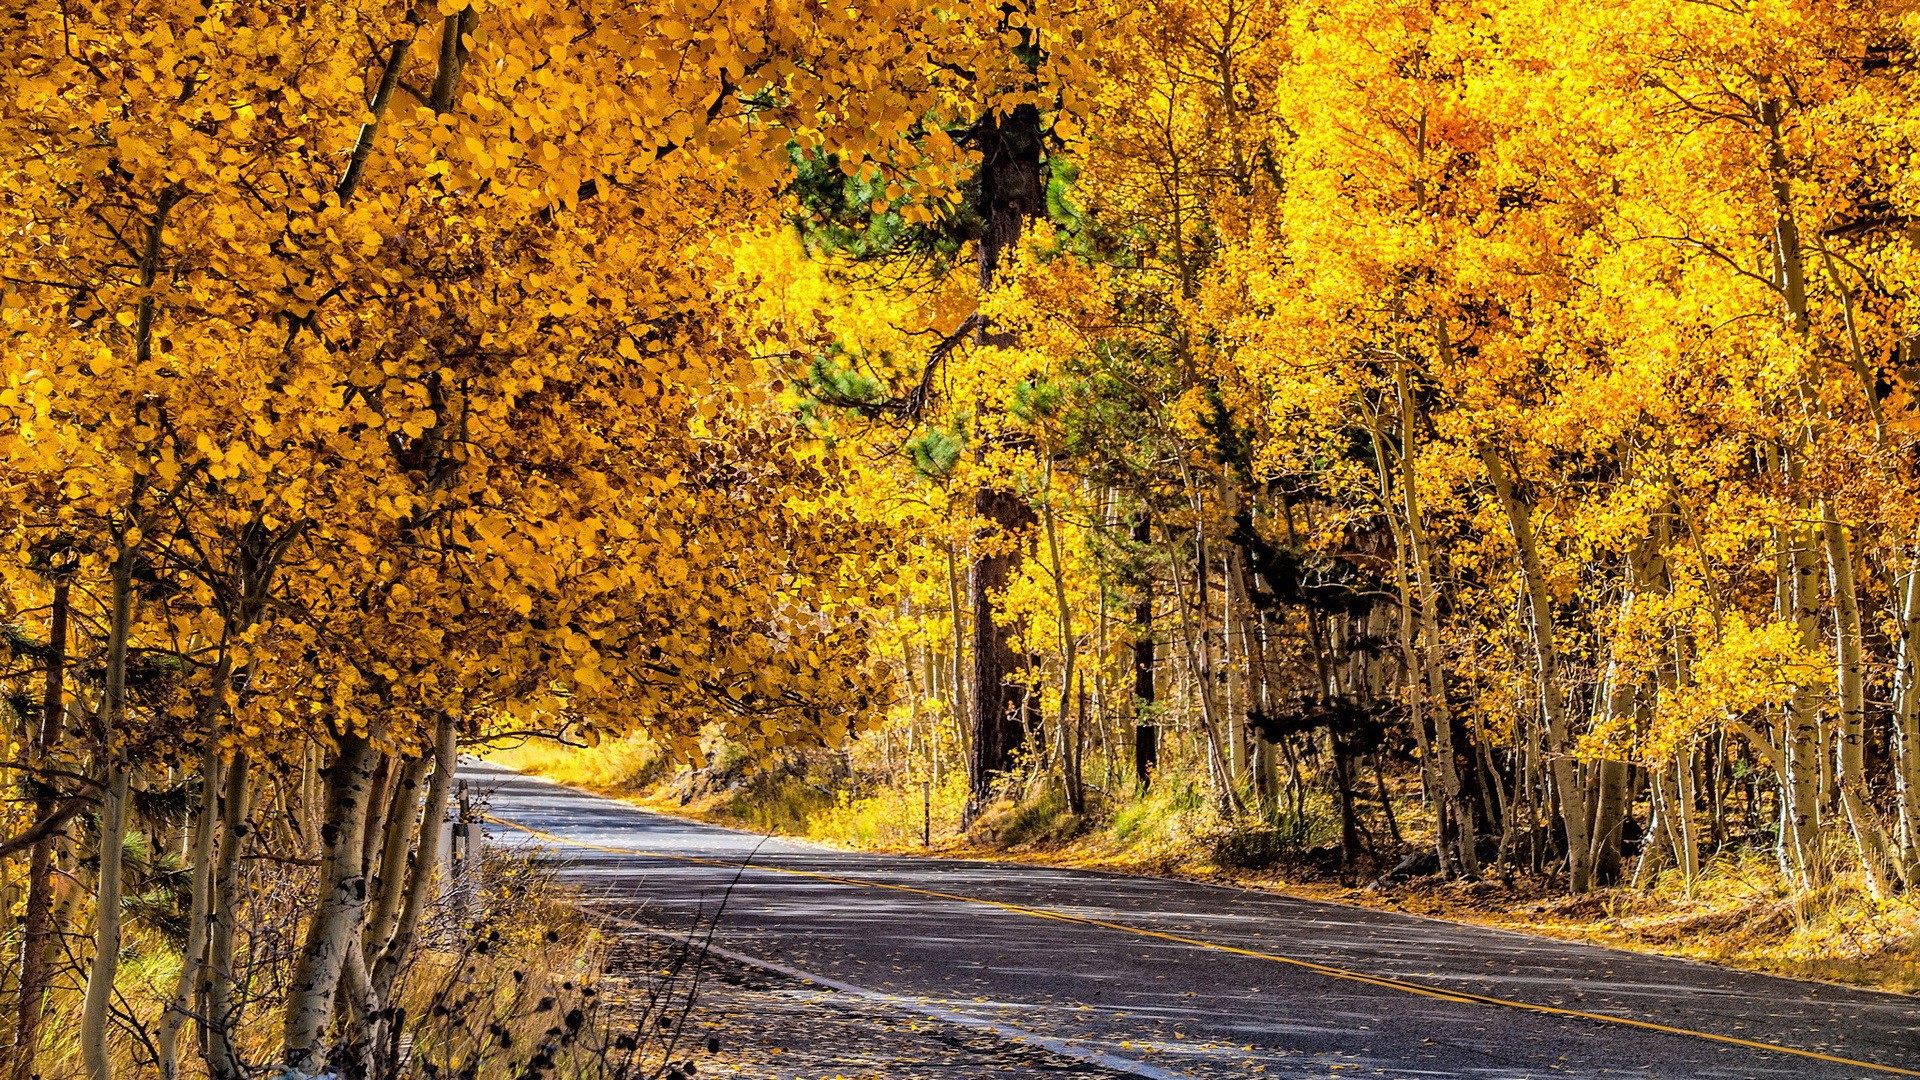 General 1920x1080 nature forest fall road asphalt outdoors trees